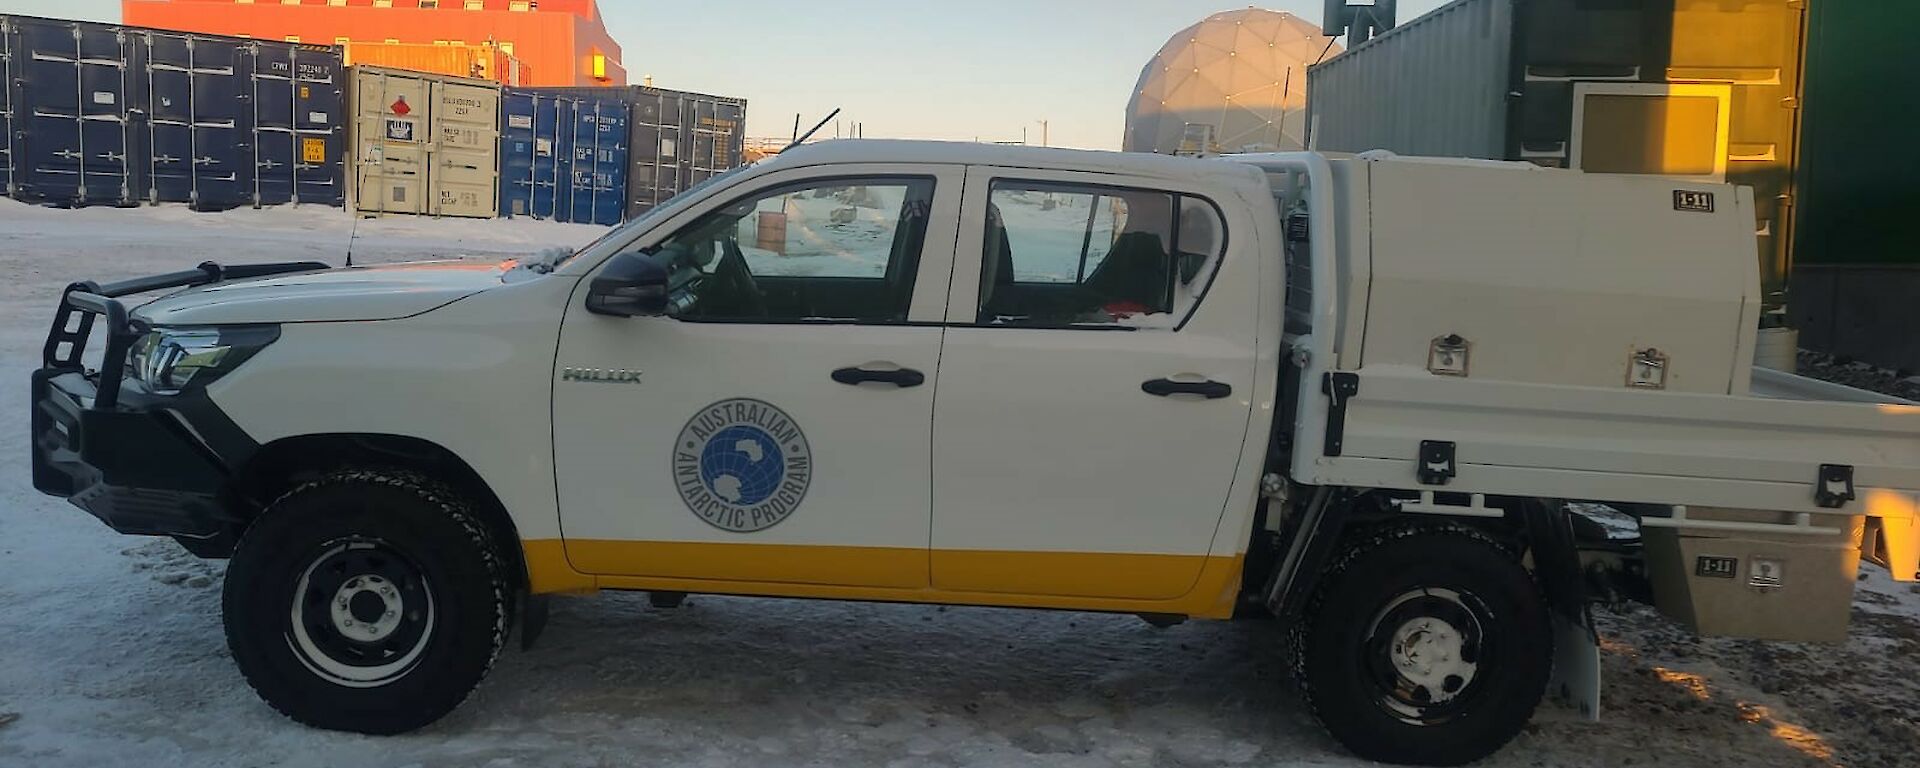 A white Hilux on station in Antarctica